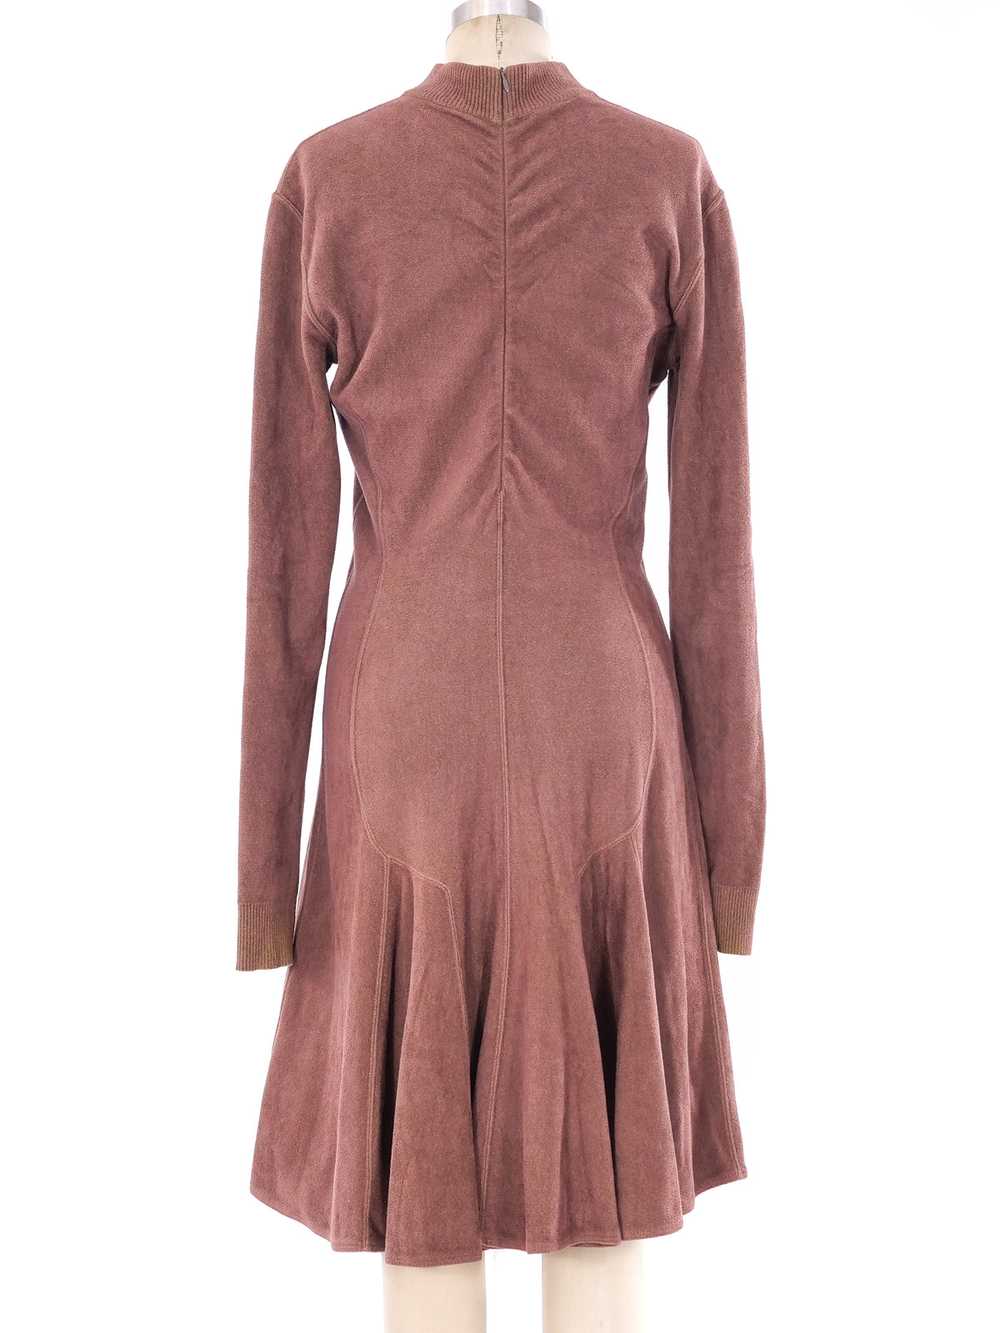 Alaia Camel Fit and Flare Knit Dress - image 4